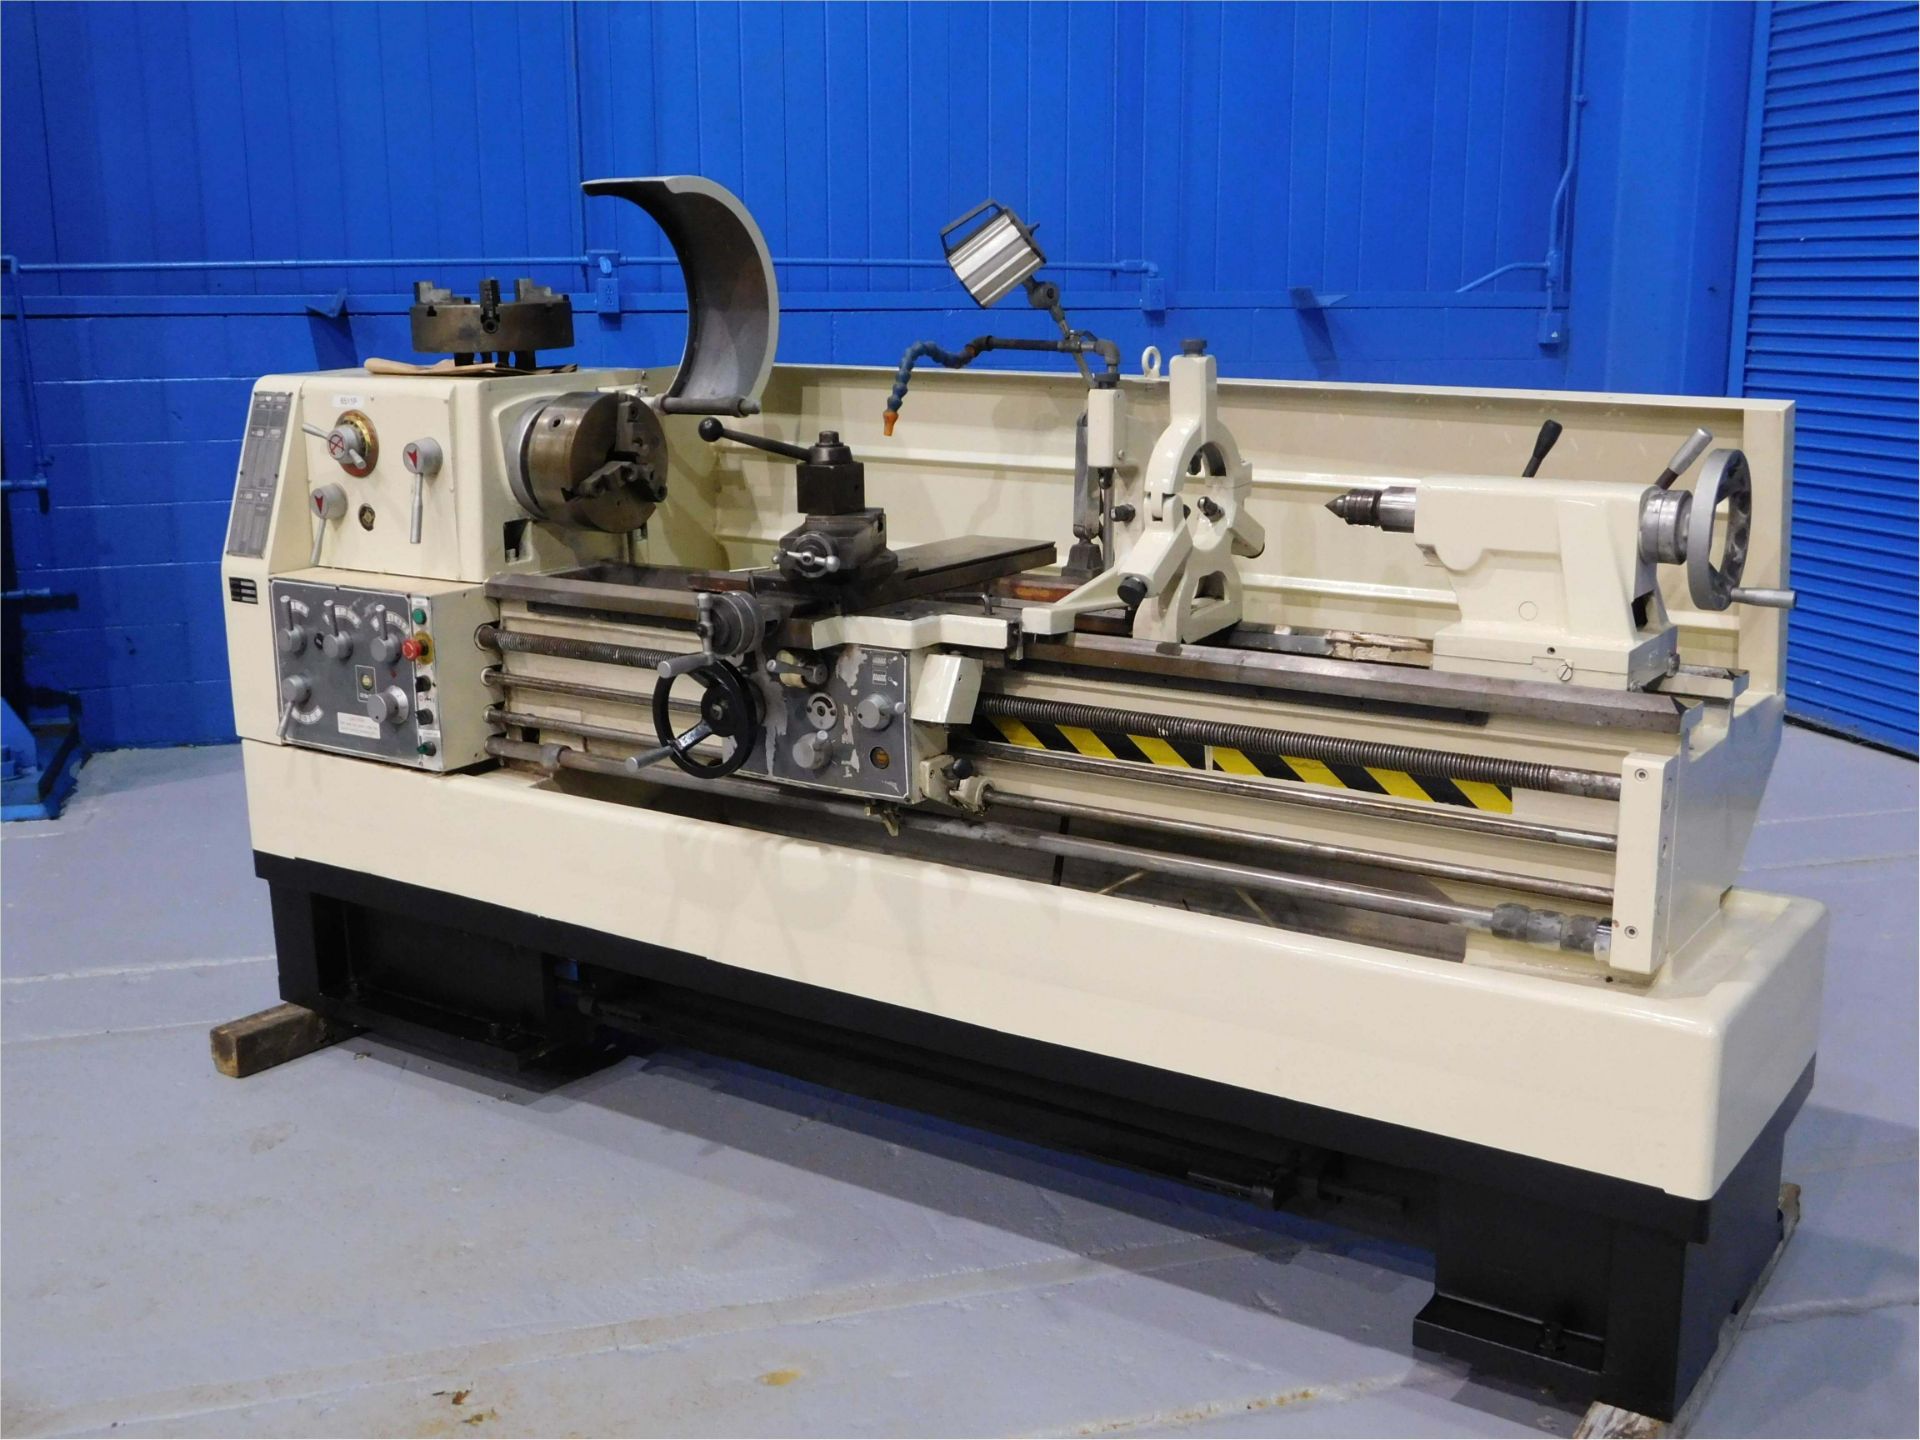 2007 Vectrax Engine Lathe, 16" x 60", Mdl: DY-410-1500, S/N: AY-A6-068 (6511P) (Located In - Image 8 of 8